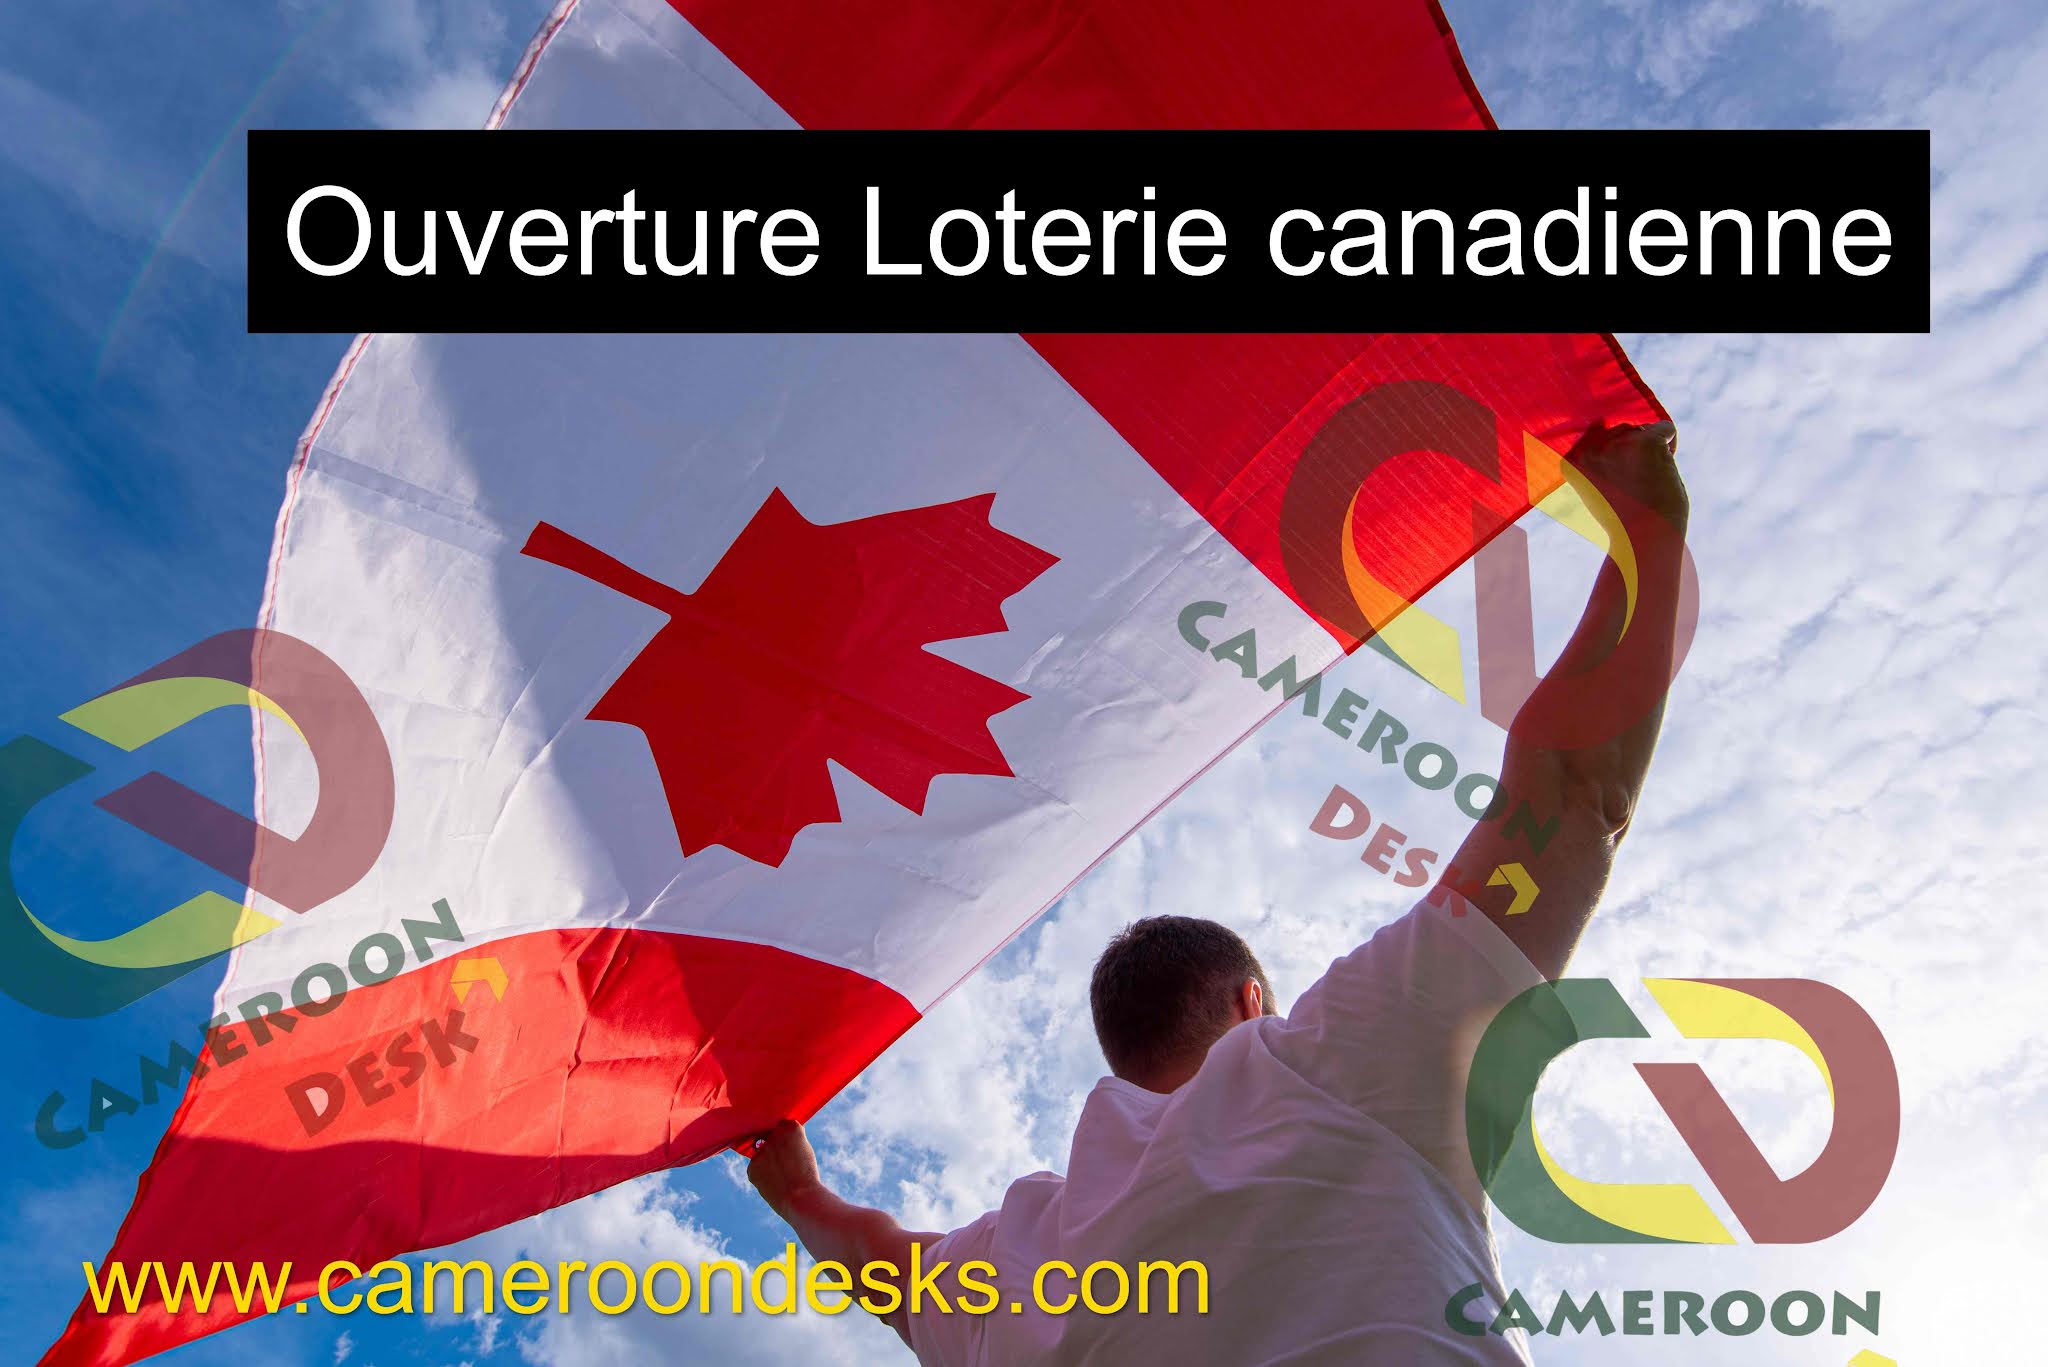 Ouverture Loterie canadienne